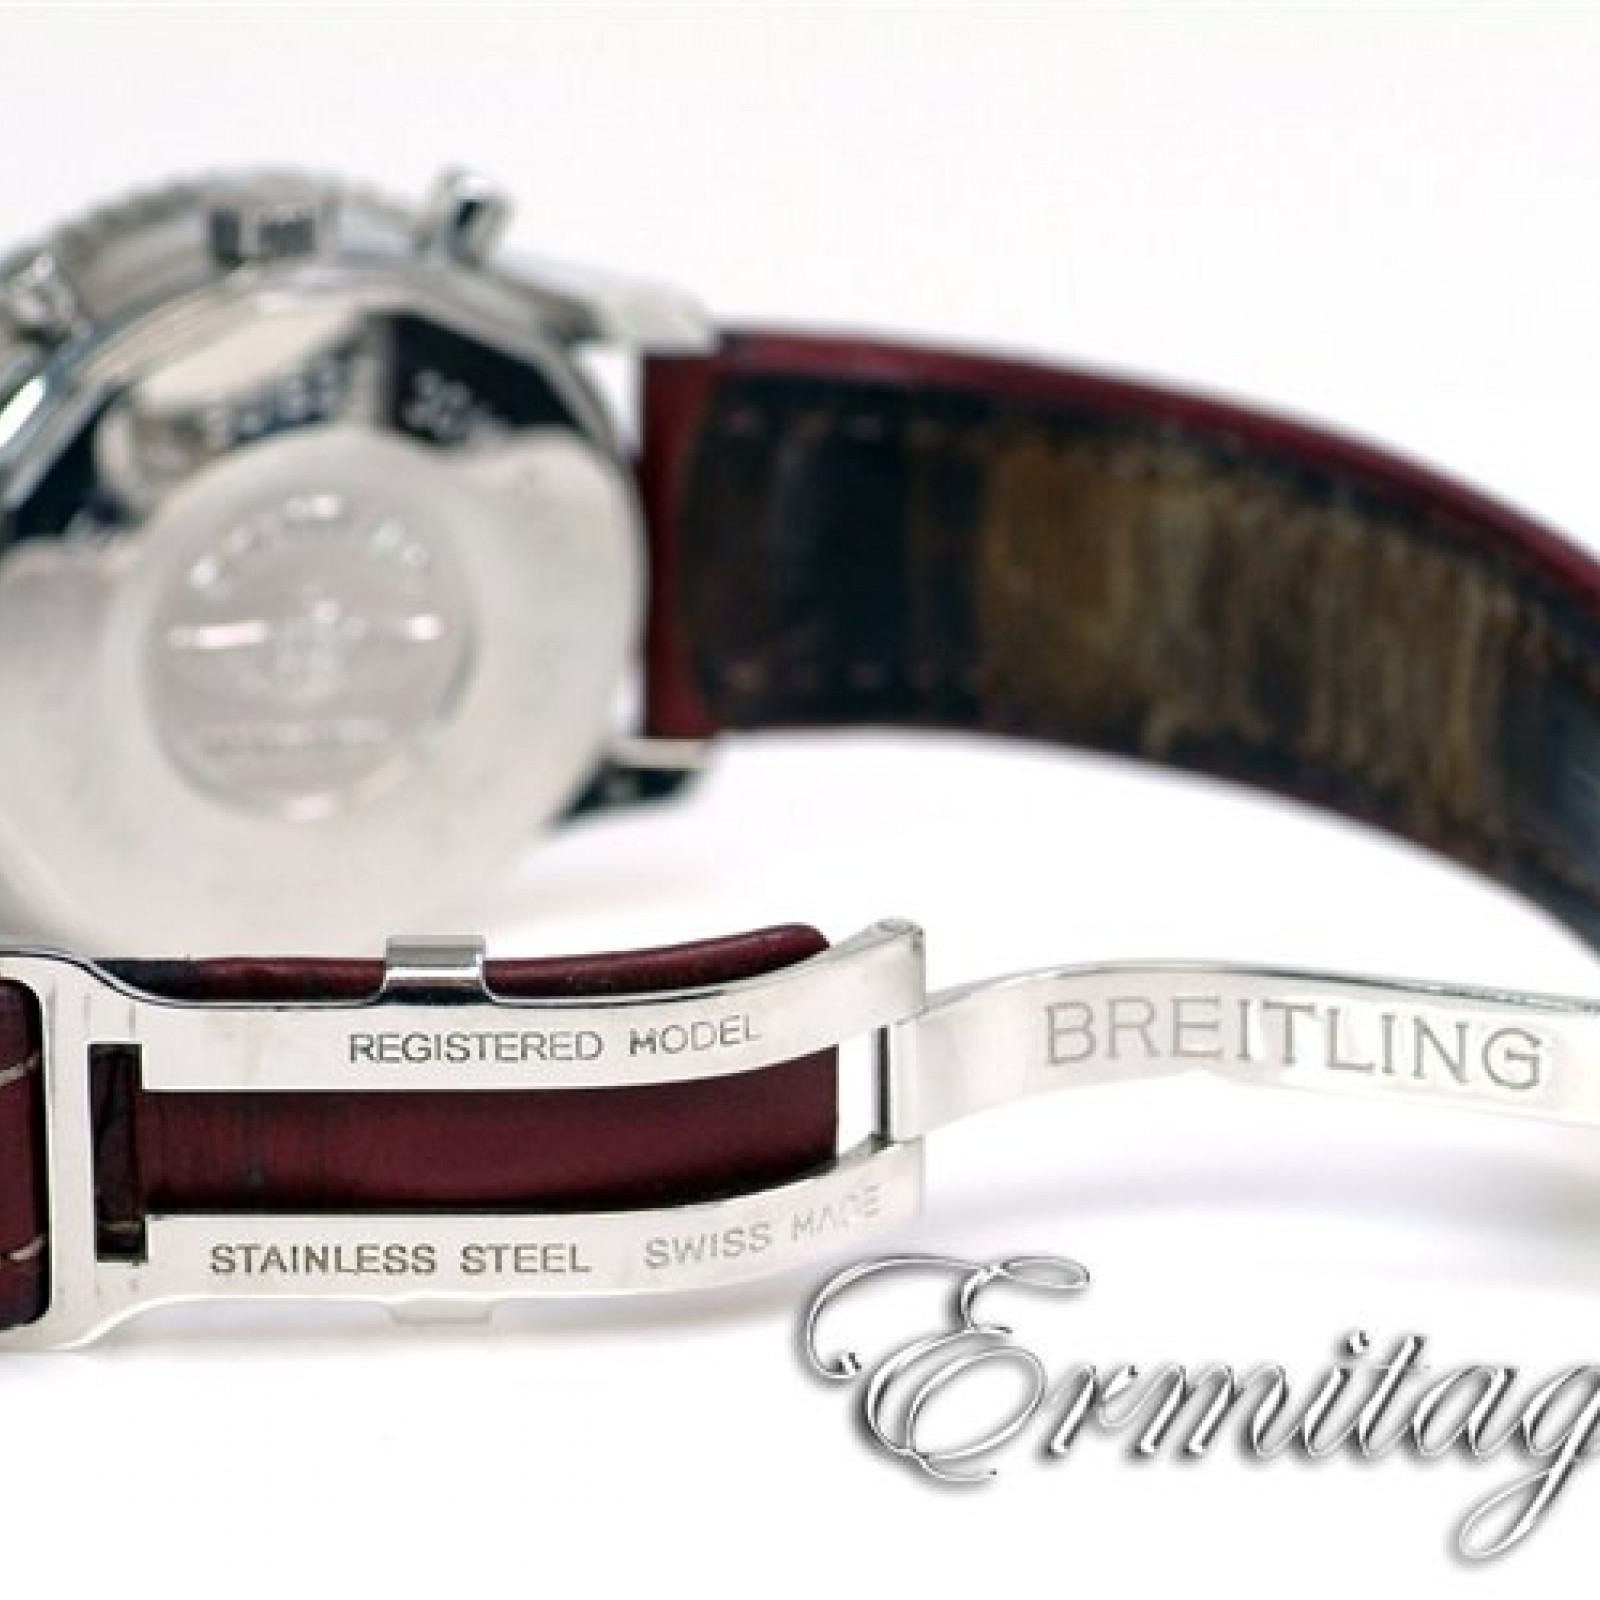 Breitling Navitimer Twin-sixty 2 A39022.1 Steel